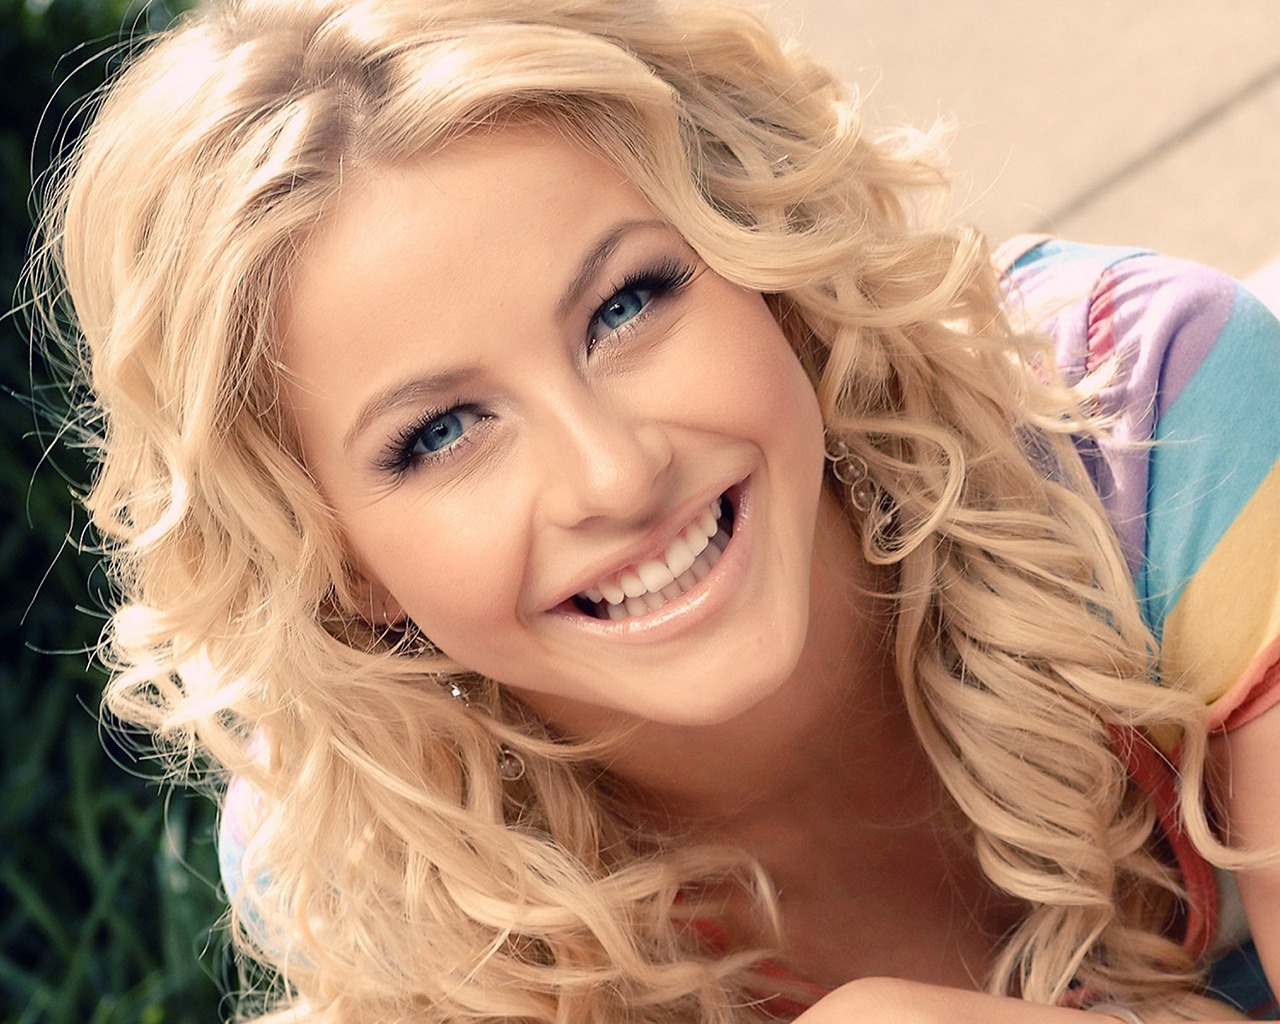 Julianne Hough Smile for 1280 x 1024 resolution